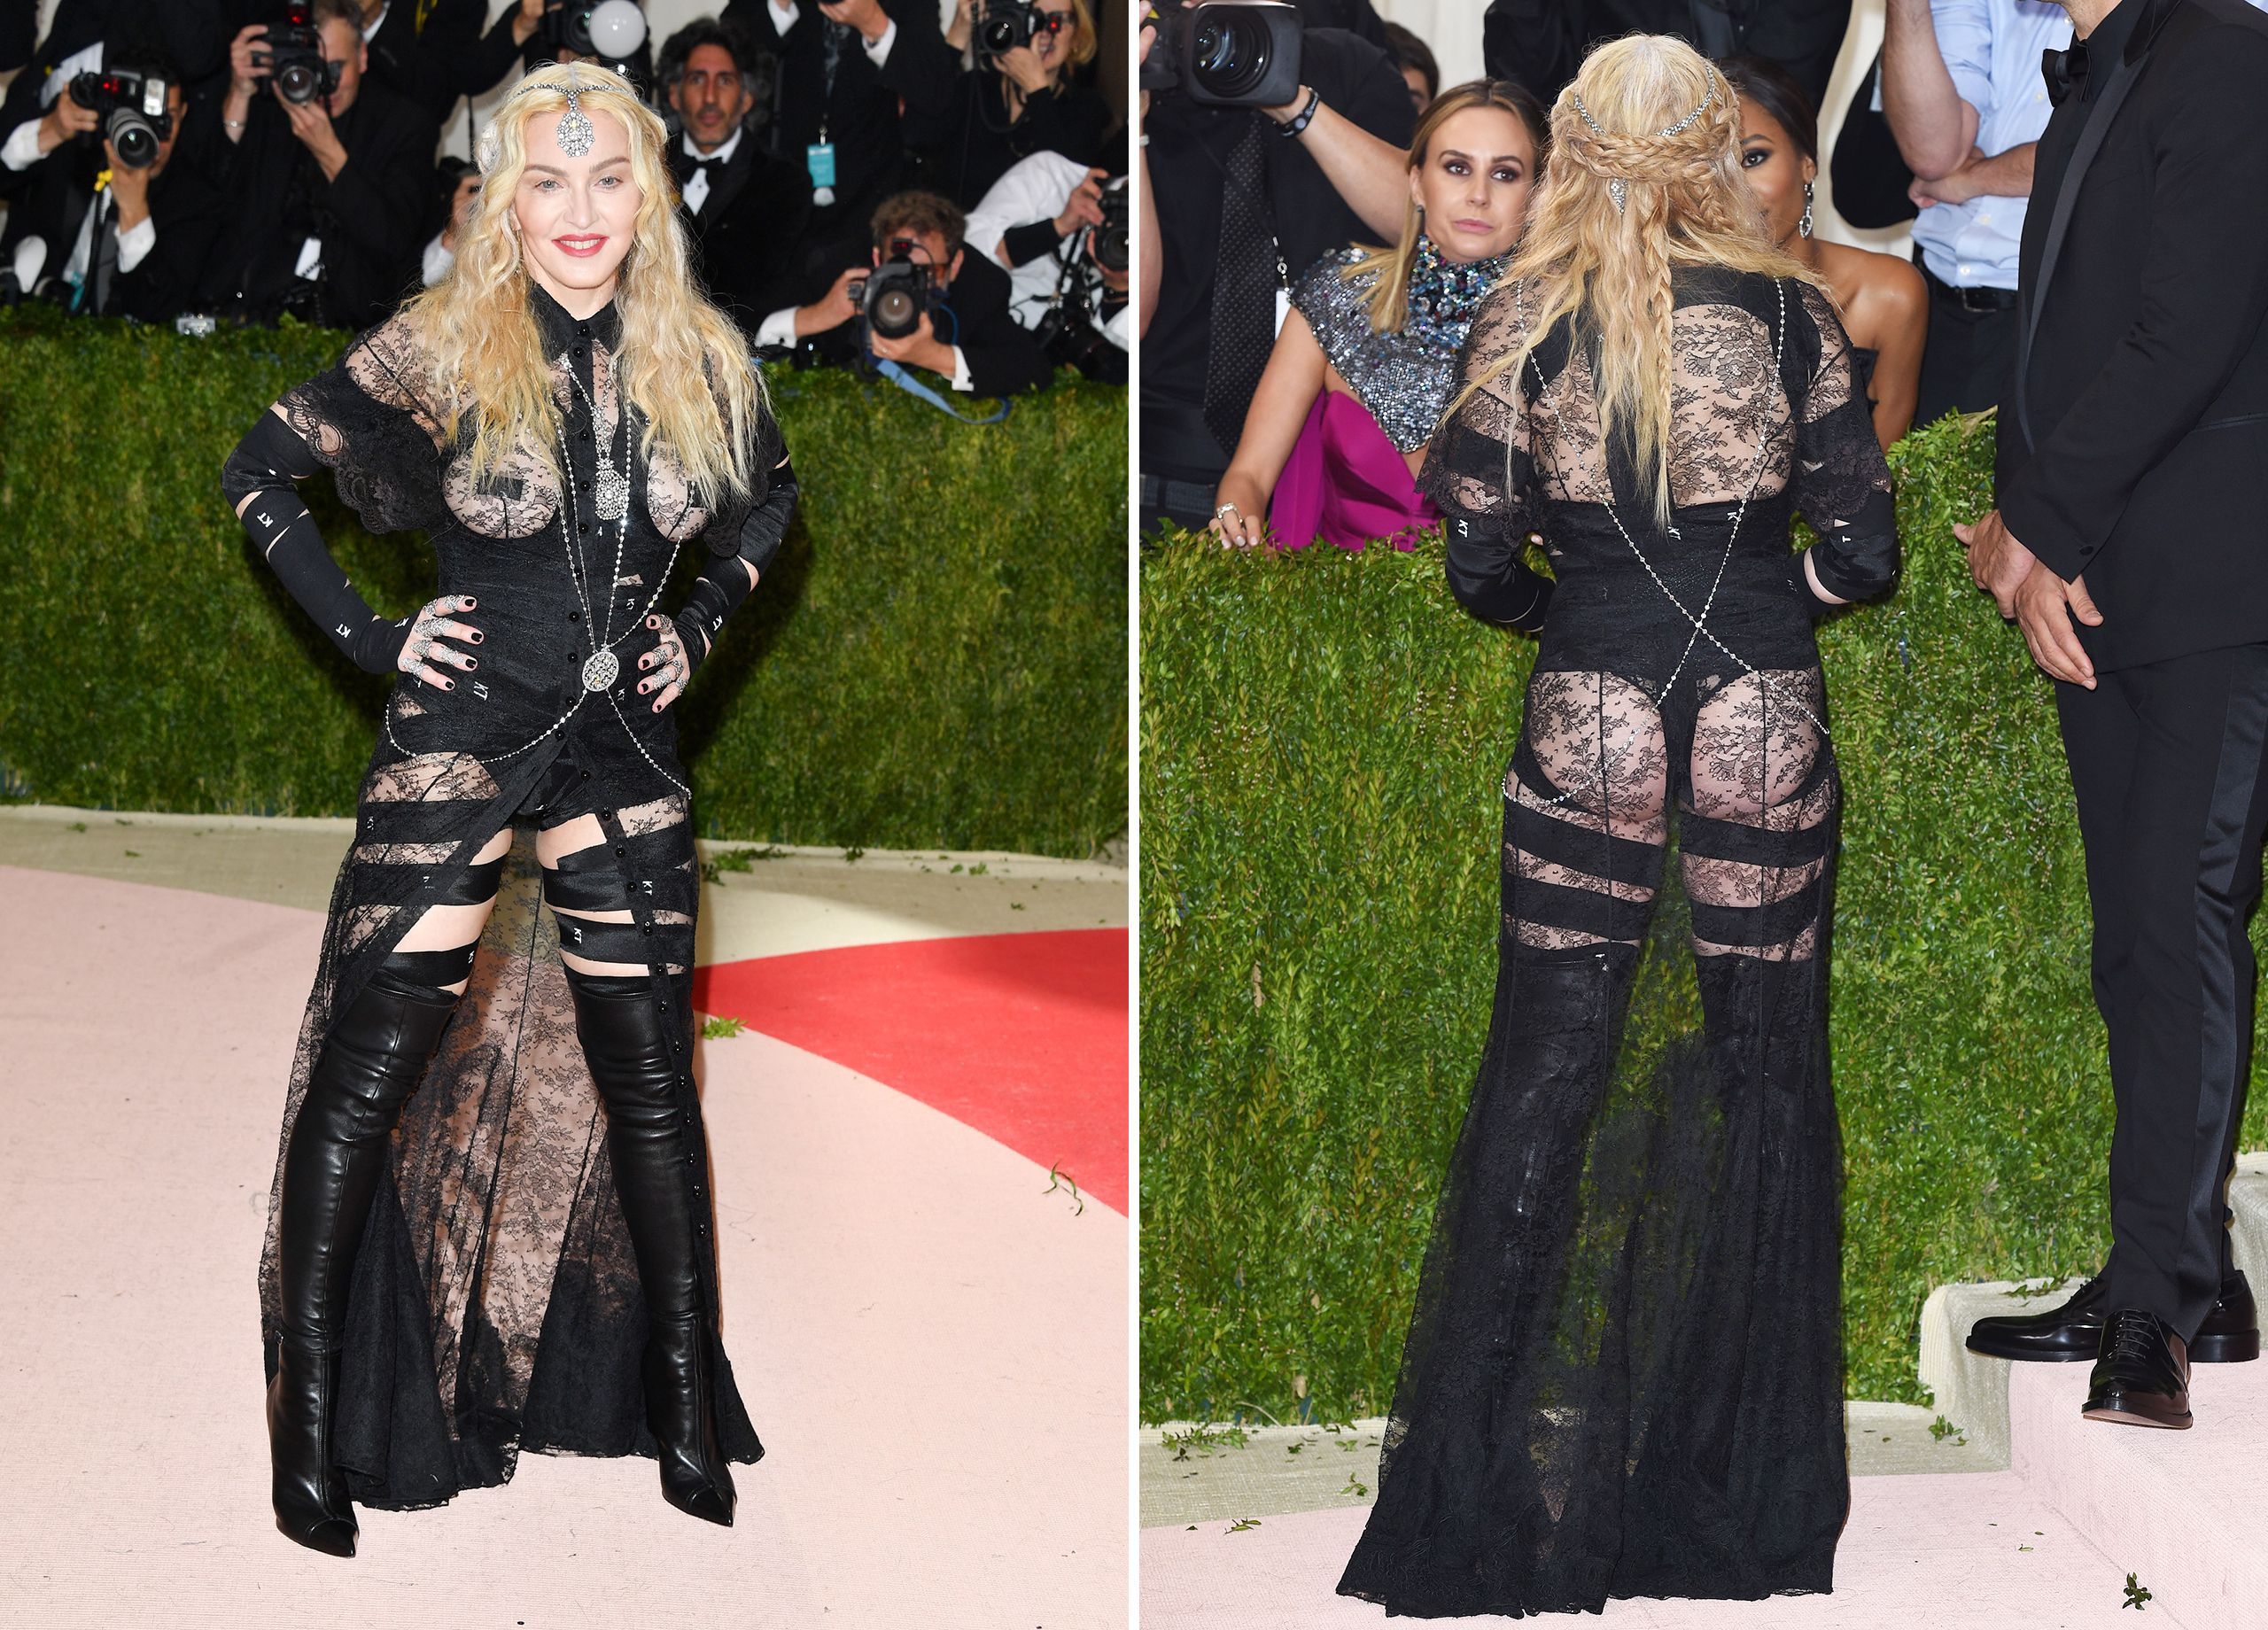 Madonna 'just joking' about going nude to Met Ball